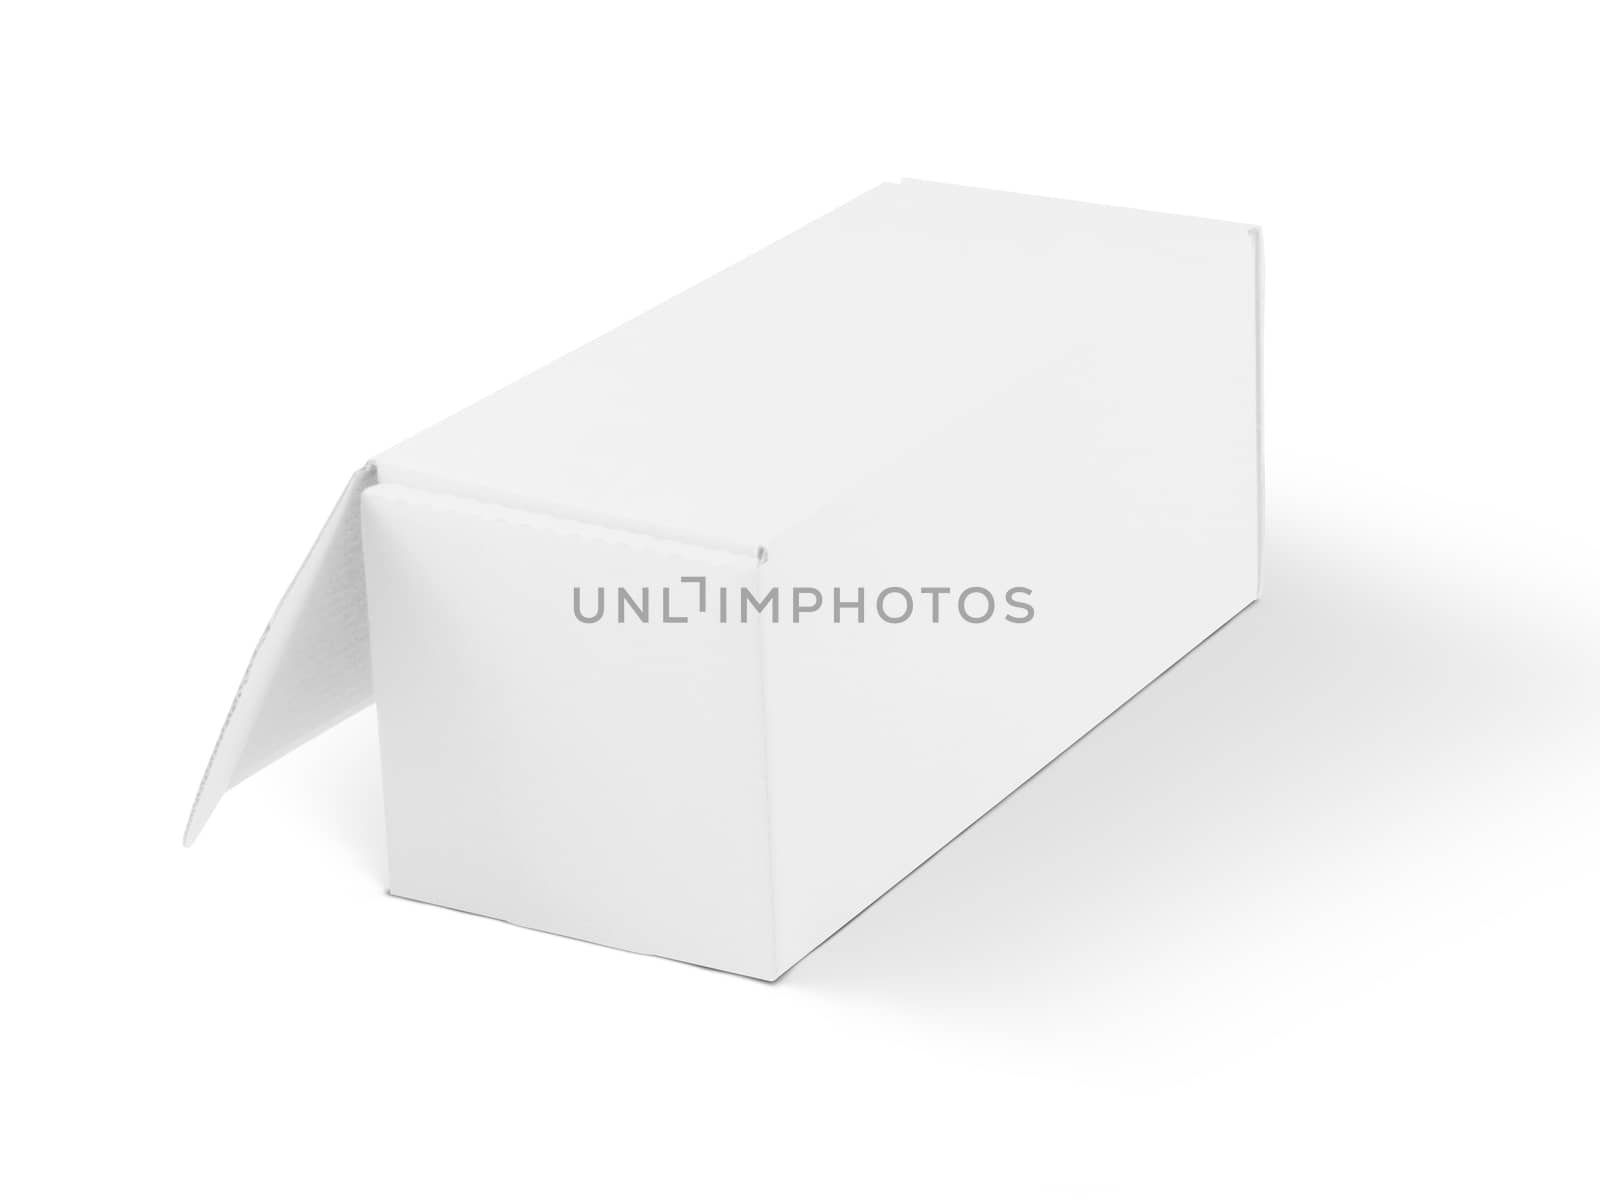 Isolated white packaging box for branding mockup by cougarsan